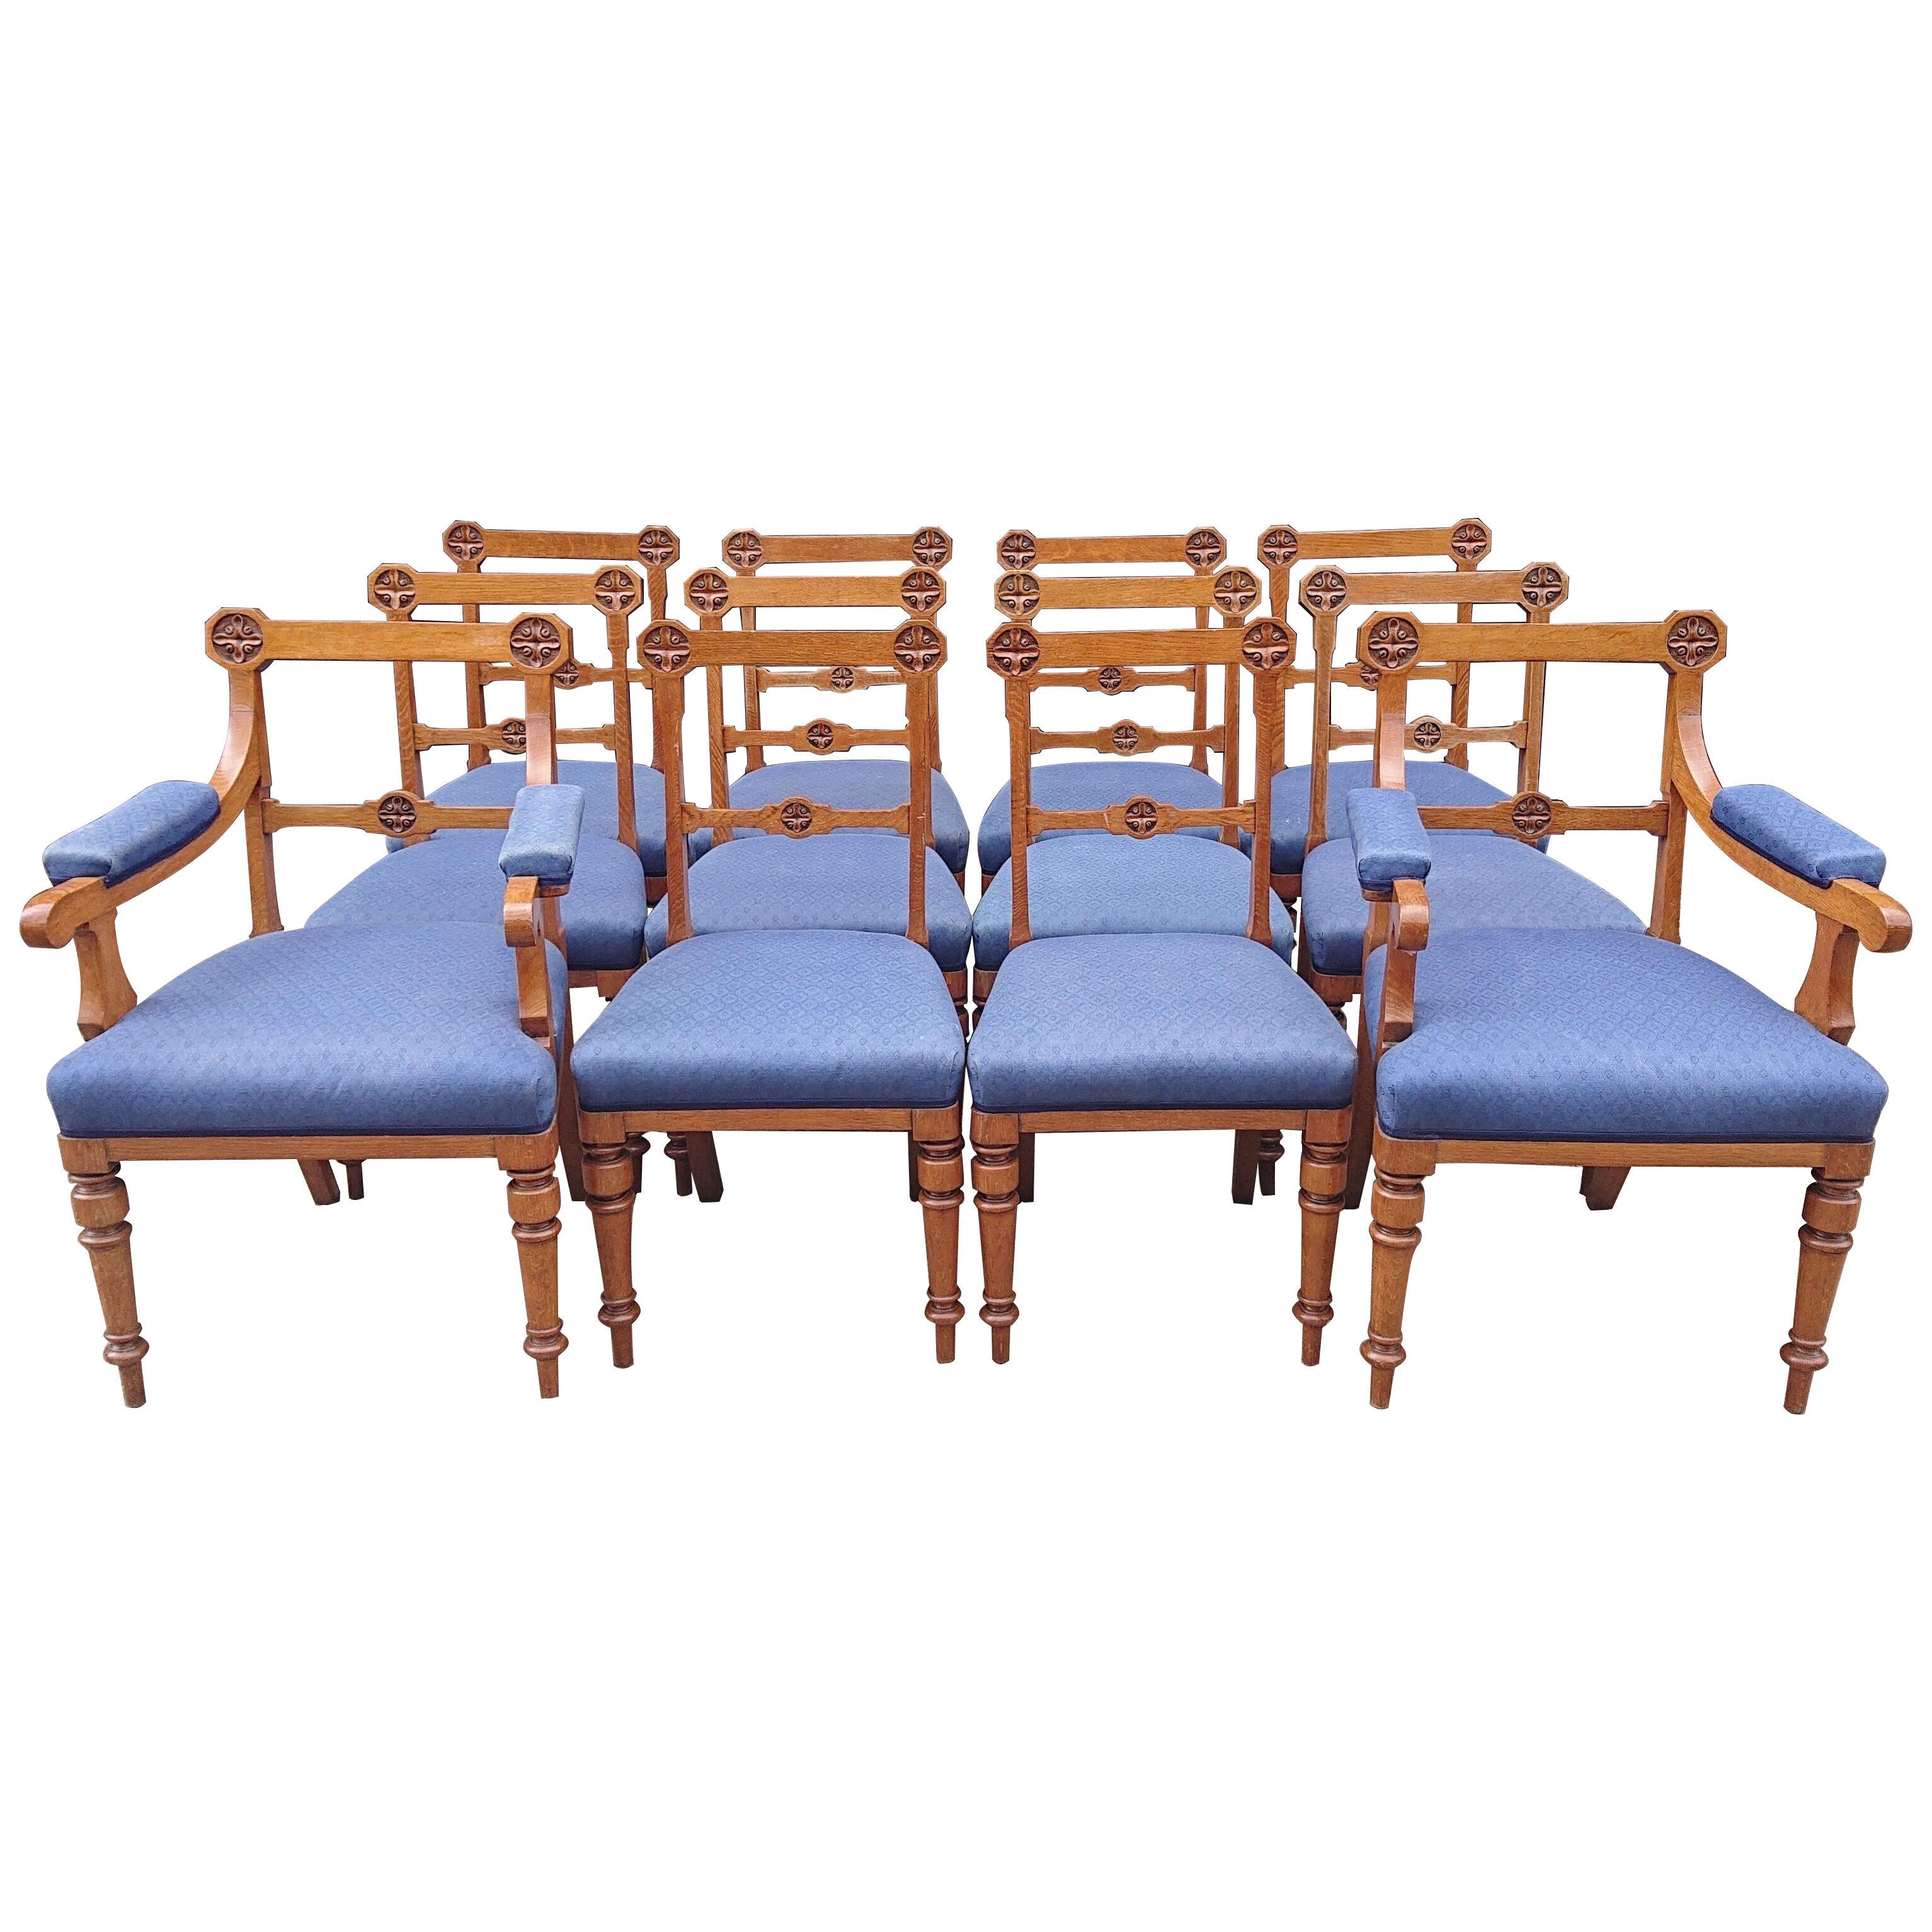 Set of Twelve Antique Dining Chairs by Lamb of Manchester